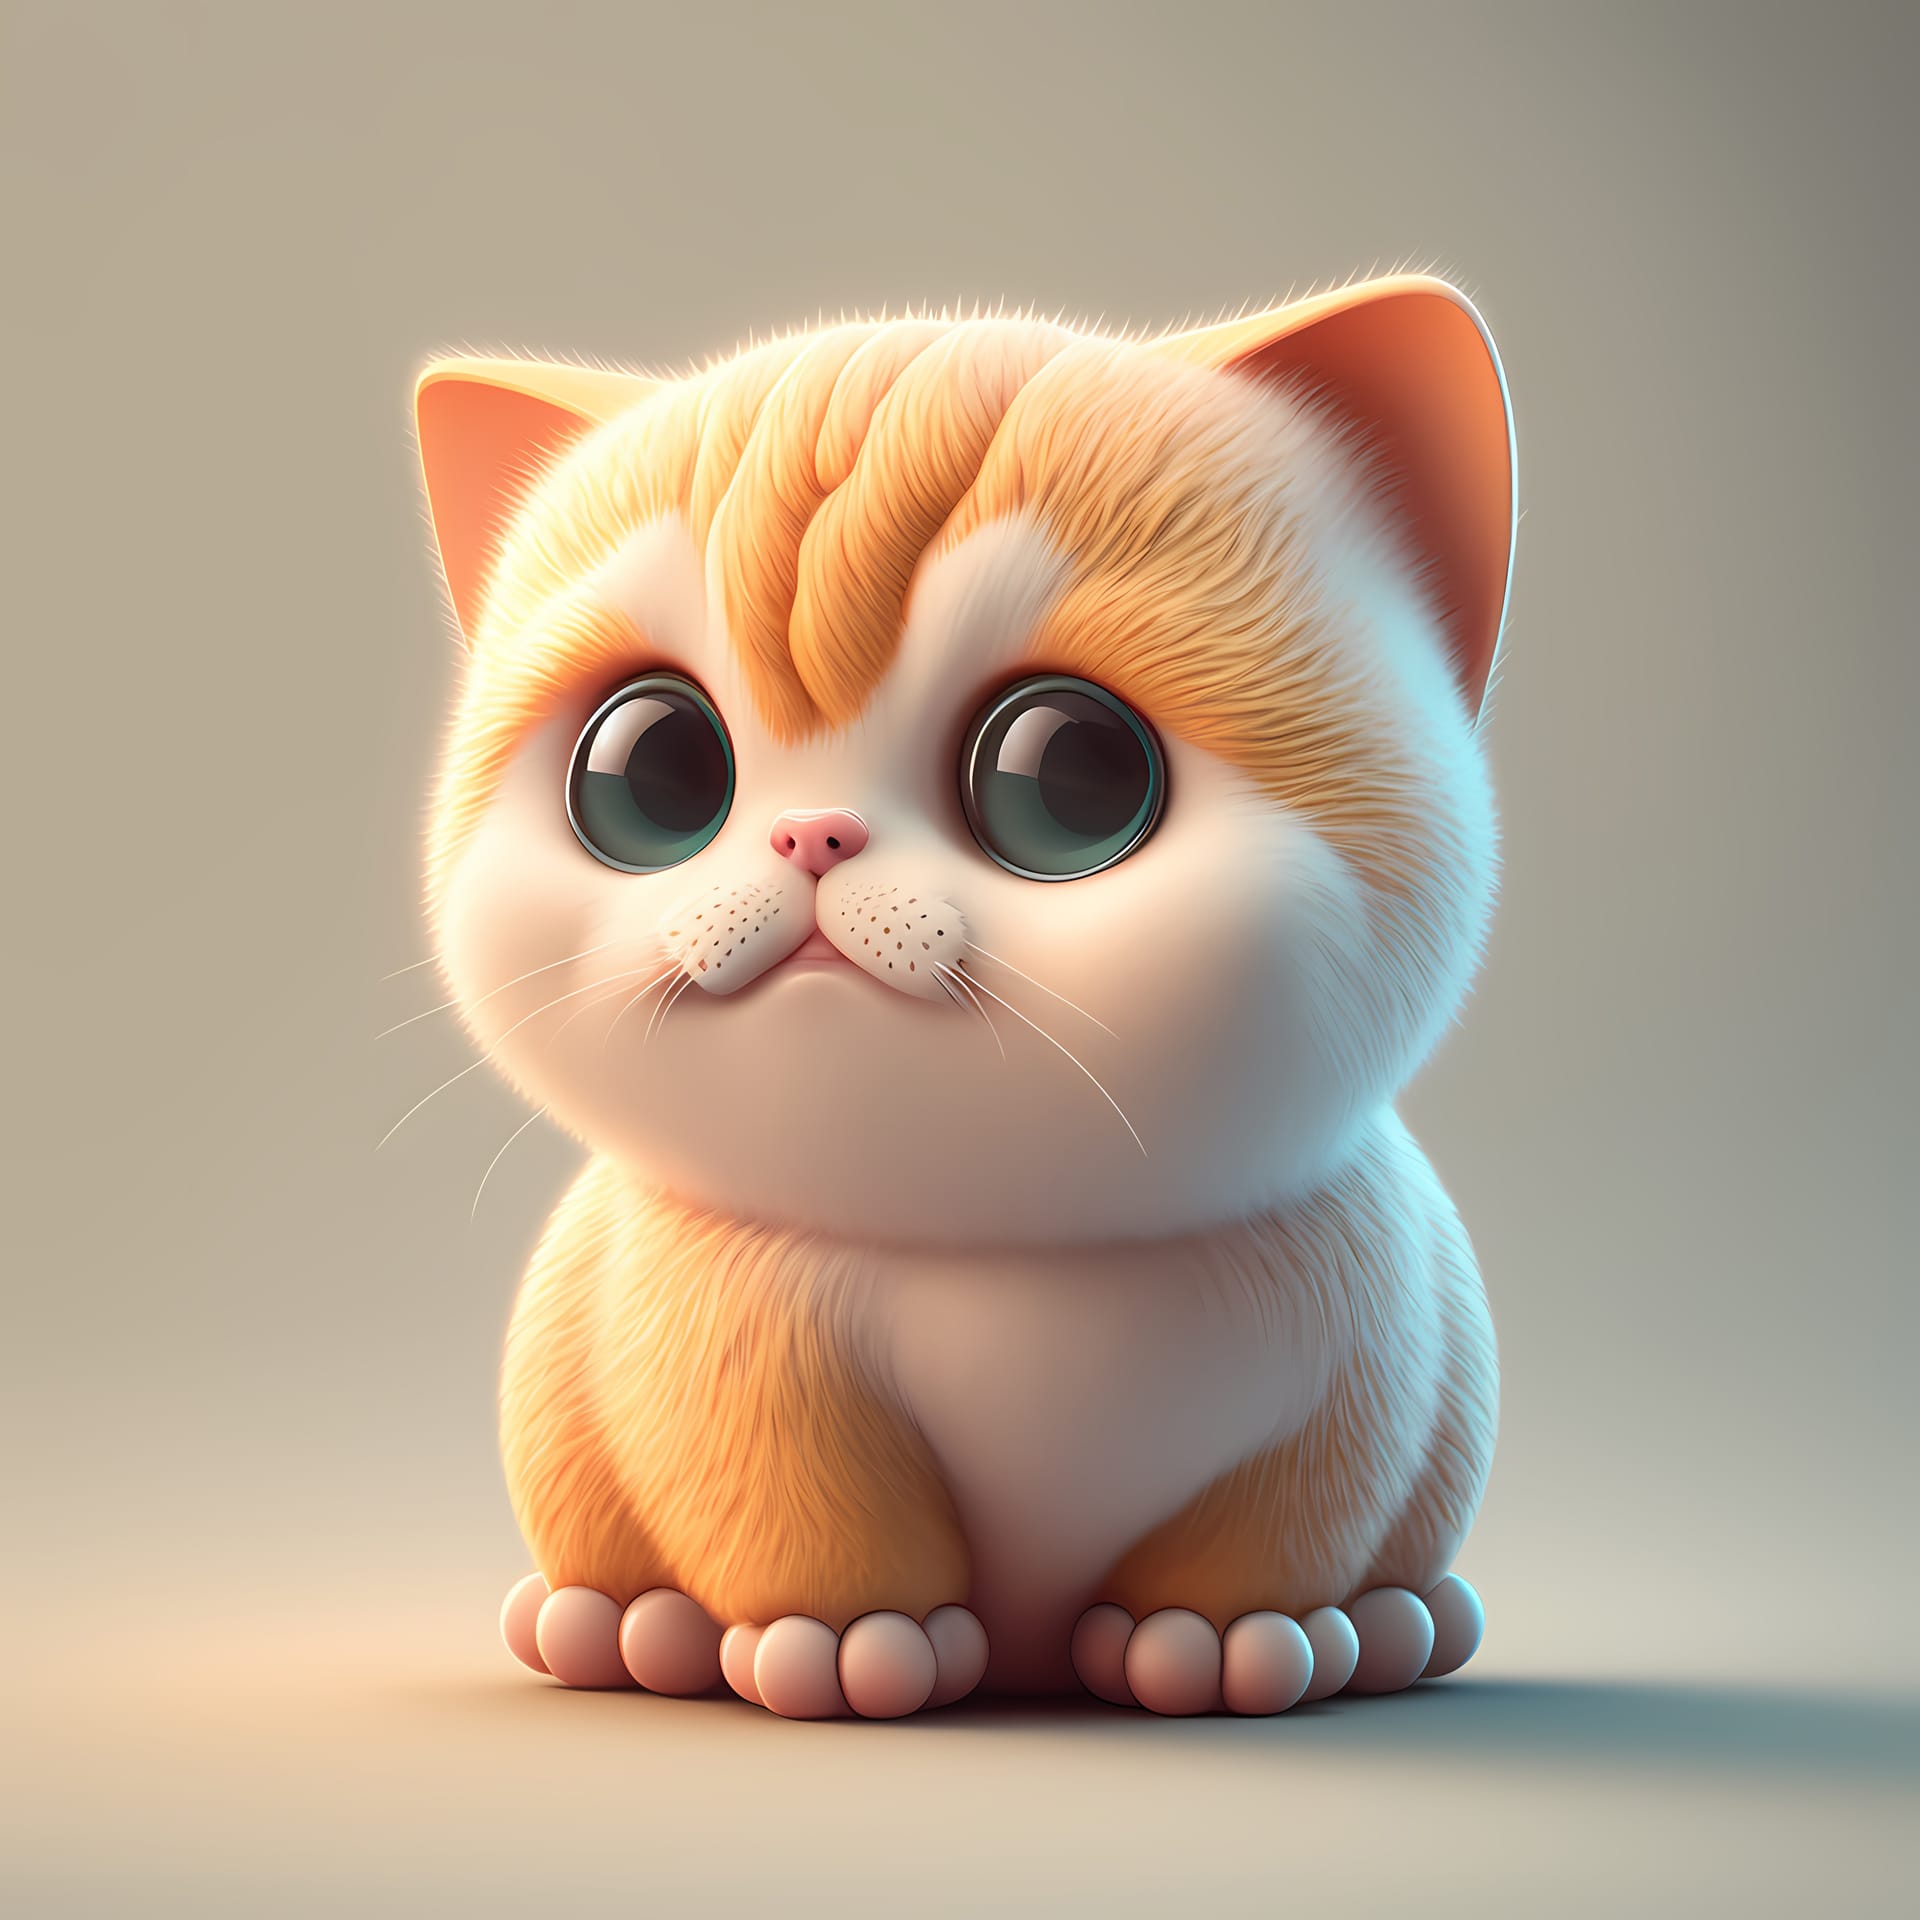 Cute cat pictures adorable cute chubby cat 3d render